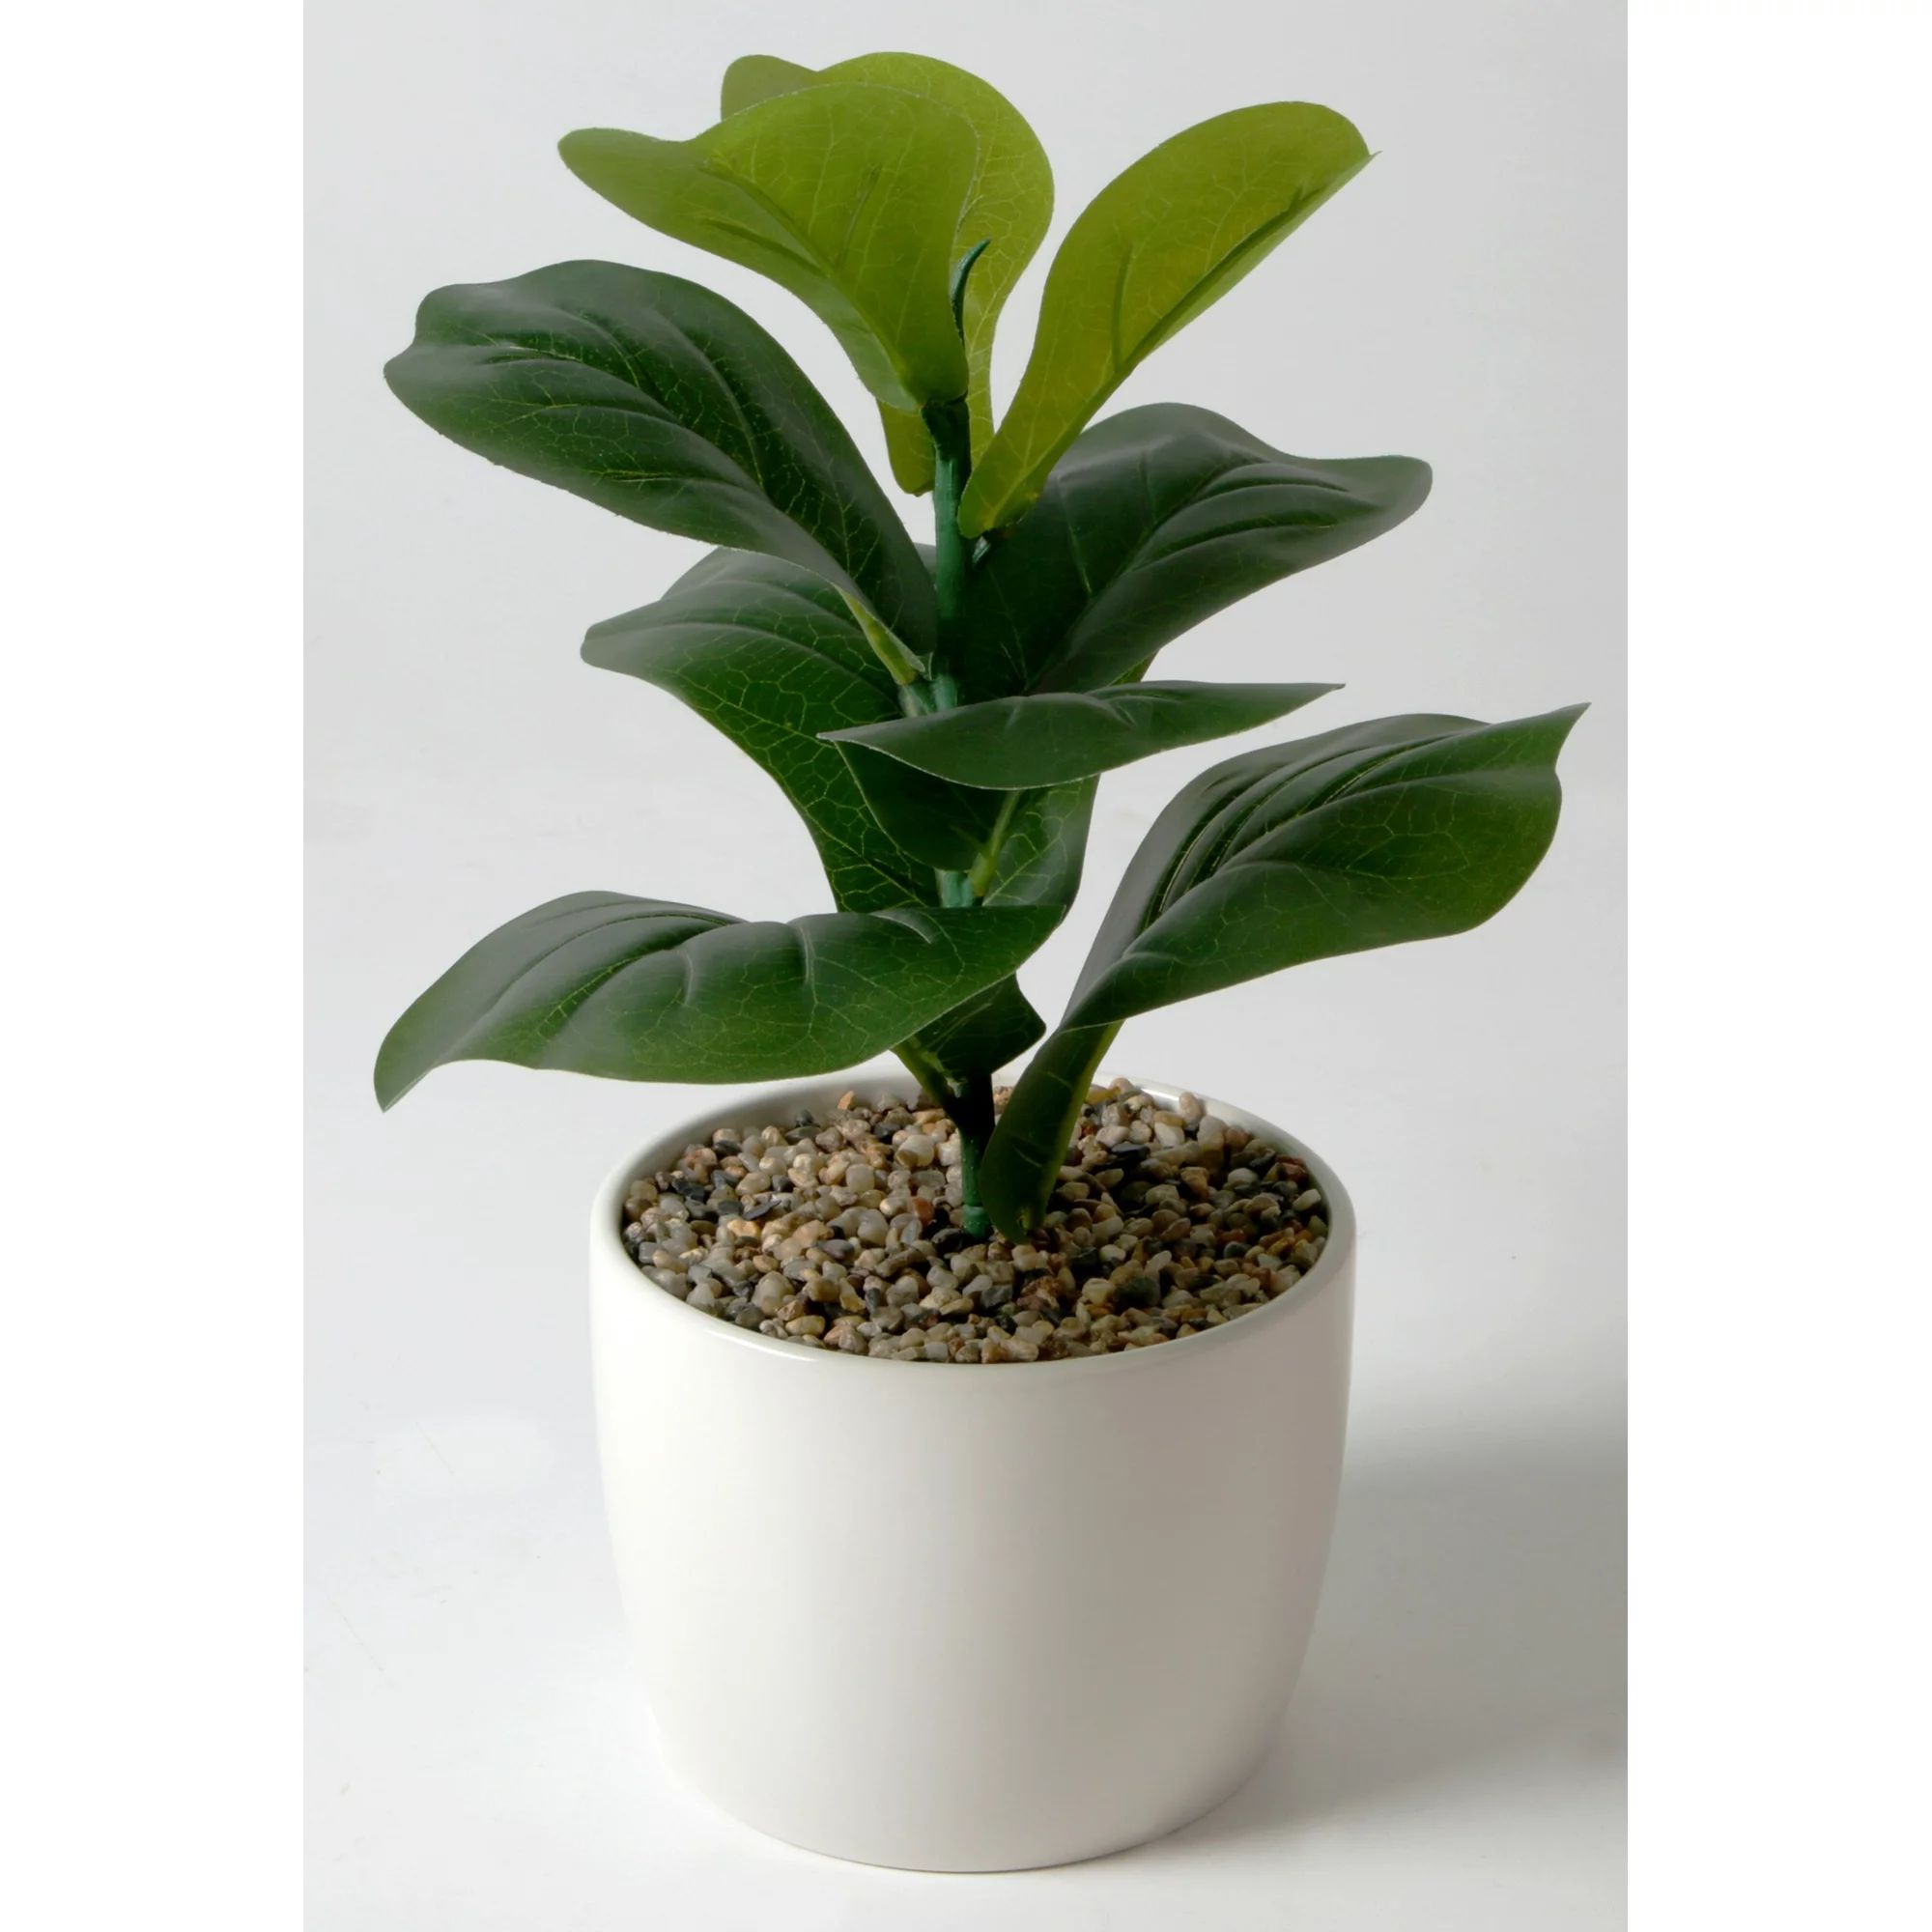 Mainstays 13" Artificial Plant Faux Fiddle Leaf in White Ceramic Vase, White | Walmart (US)